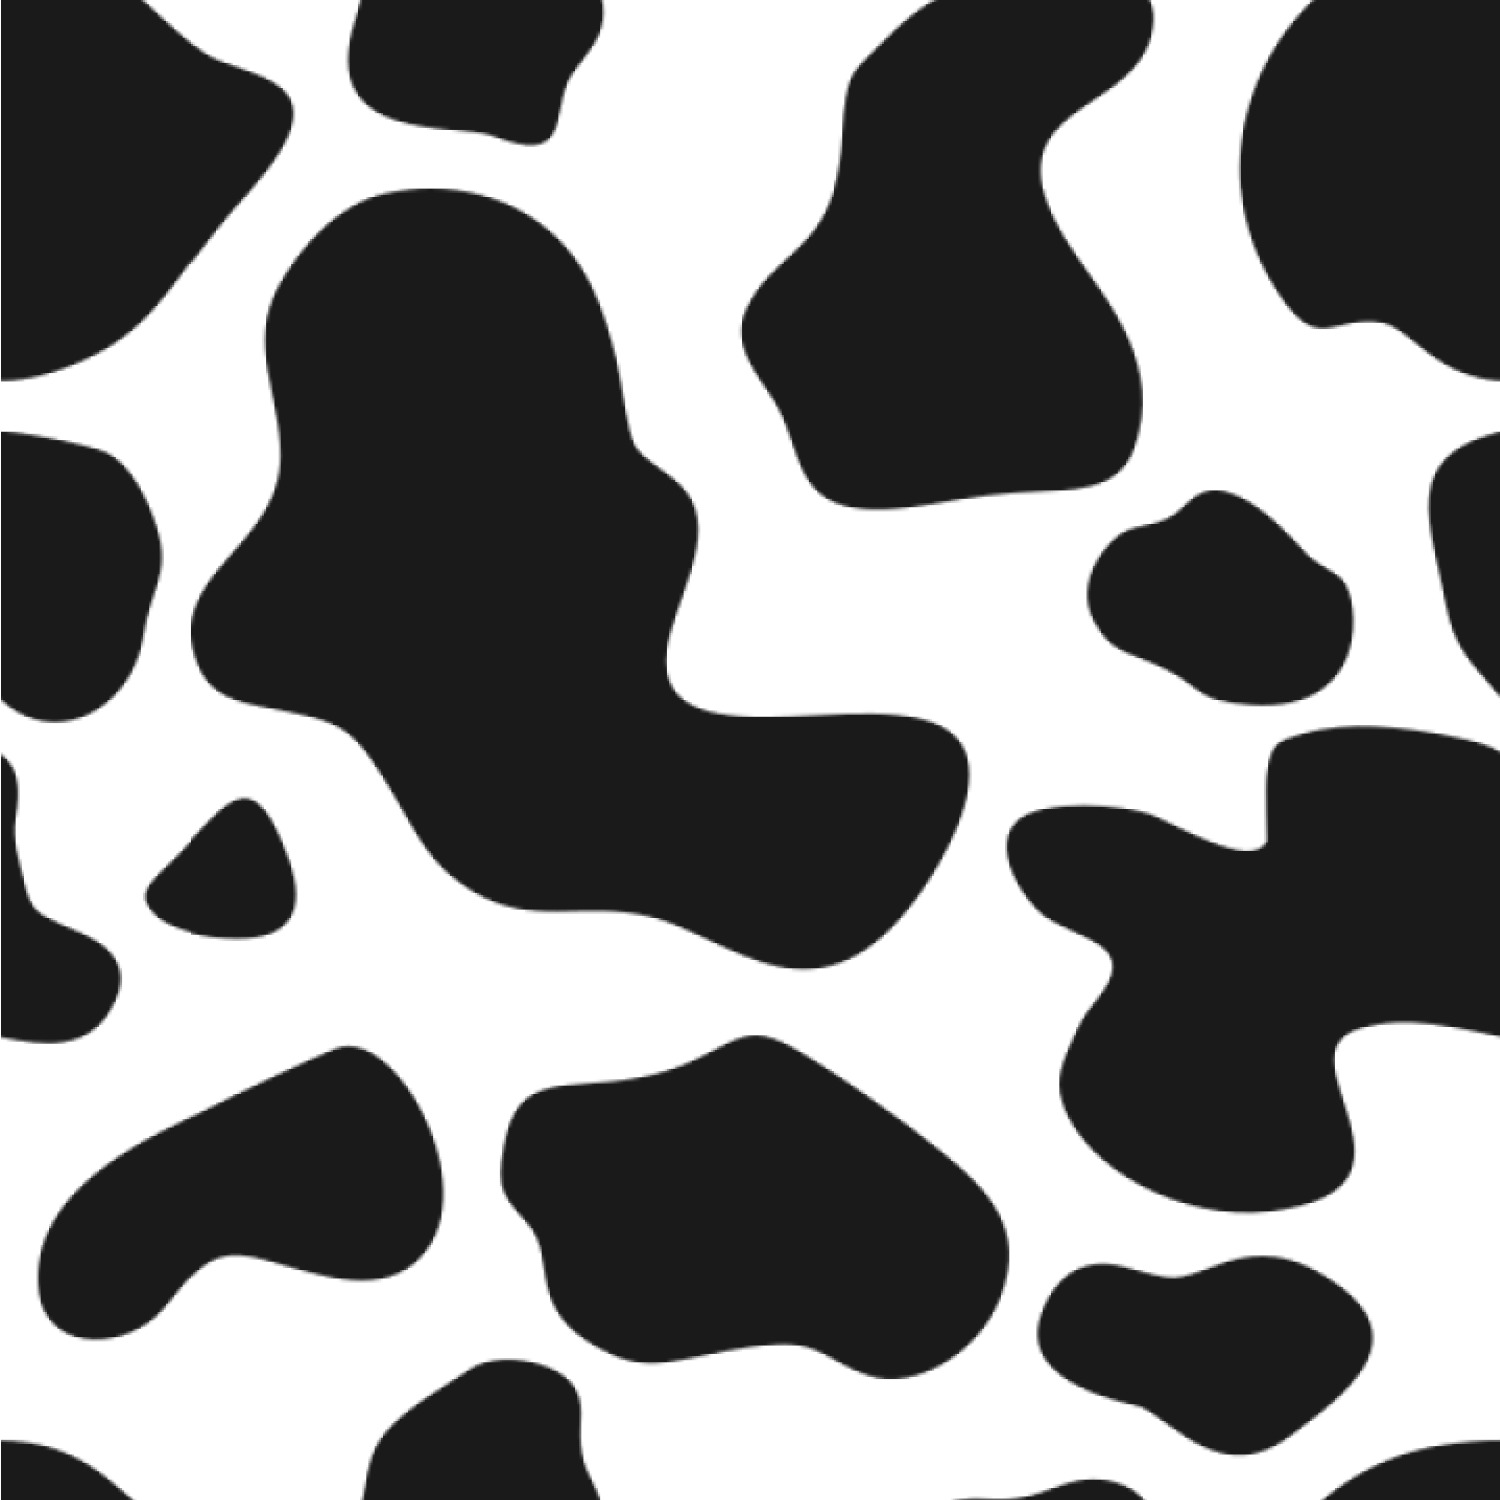 Aesthetic Cow Print / Cow skin seamless pattern vector free image by